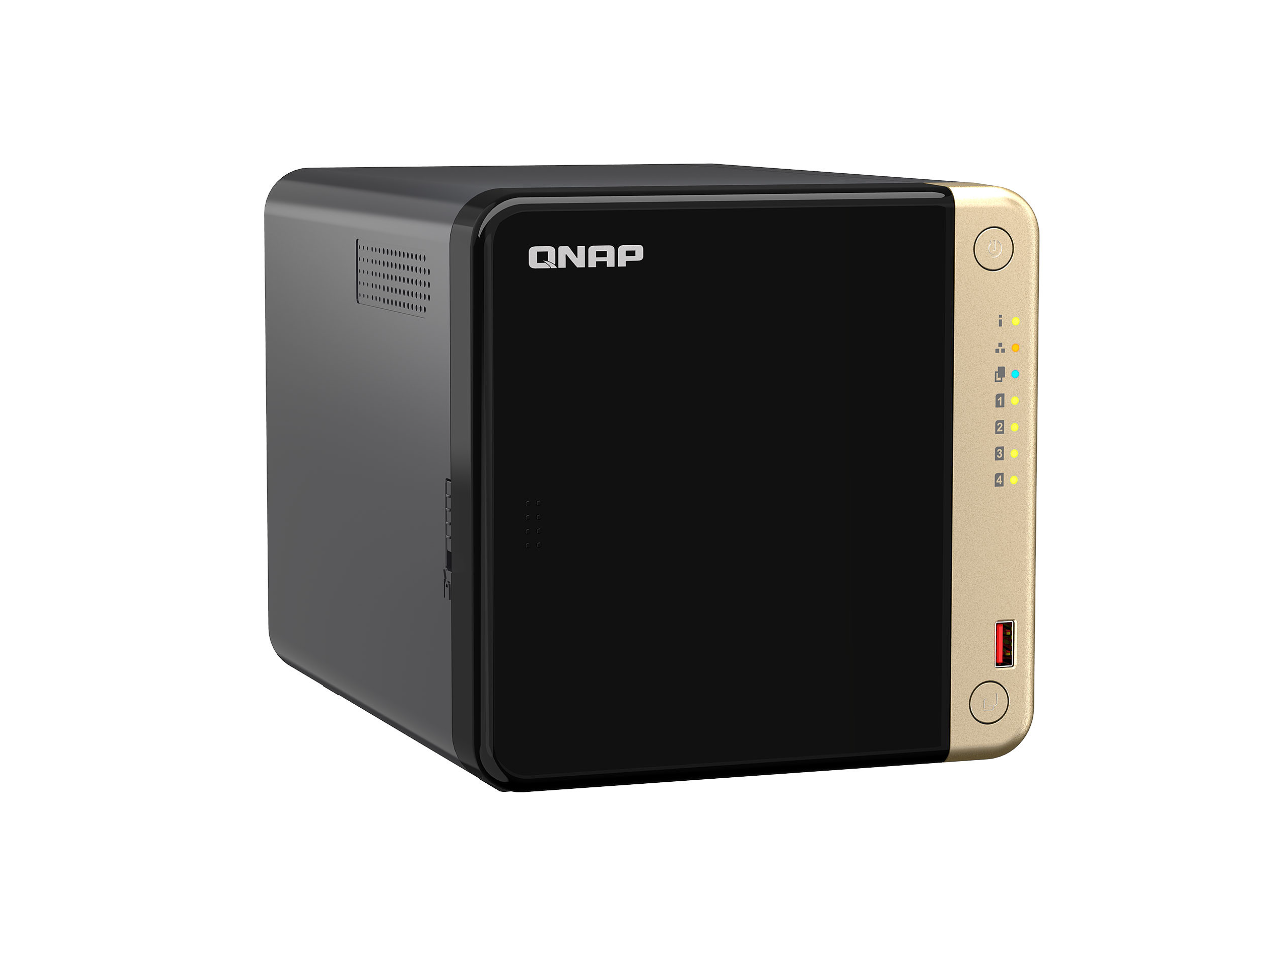 QNAP TS-464 4-Bay NAS with 8GB RAM and 16TB (4 x 4TB) of Western Digital Red Plus Drives Fully Assembled and Tested